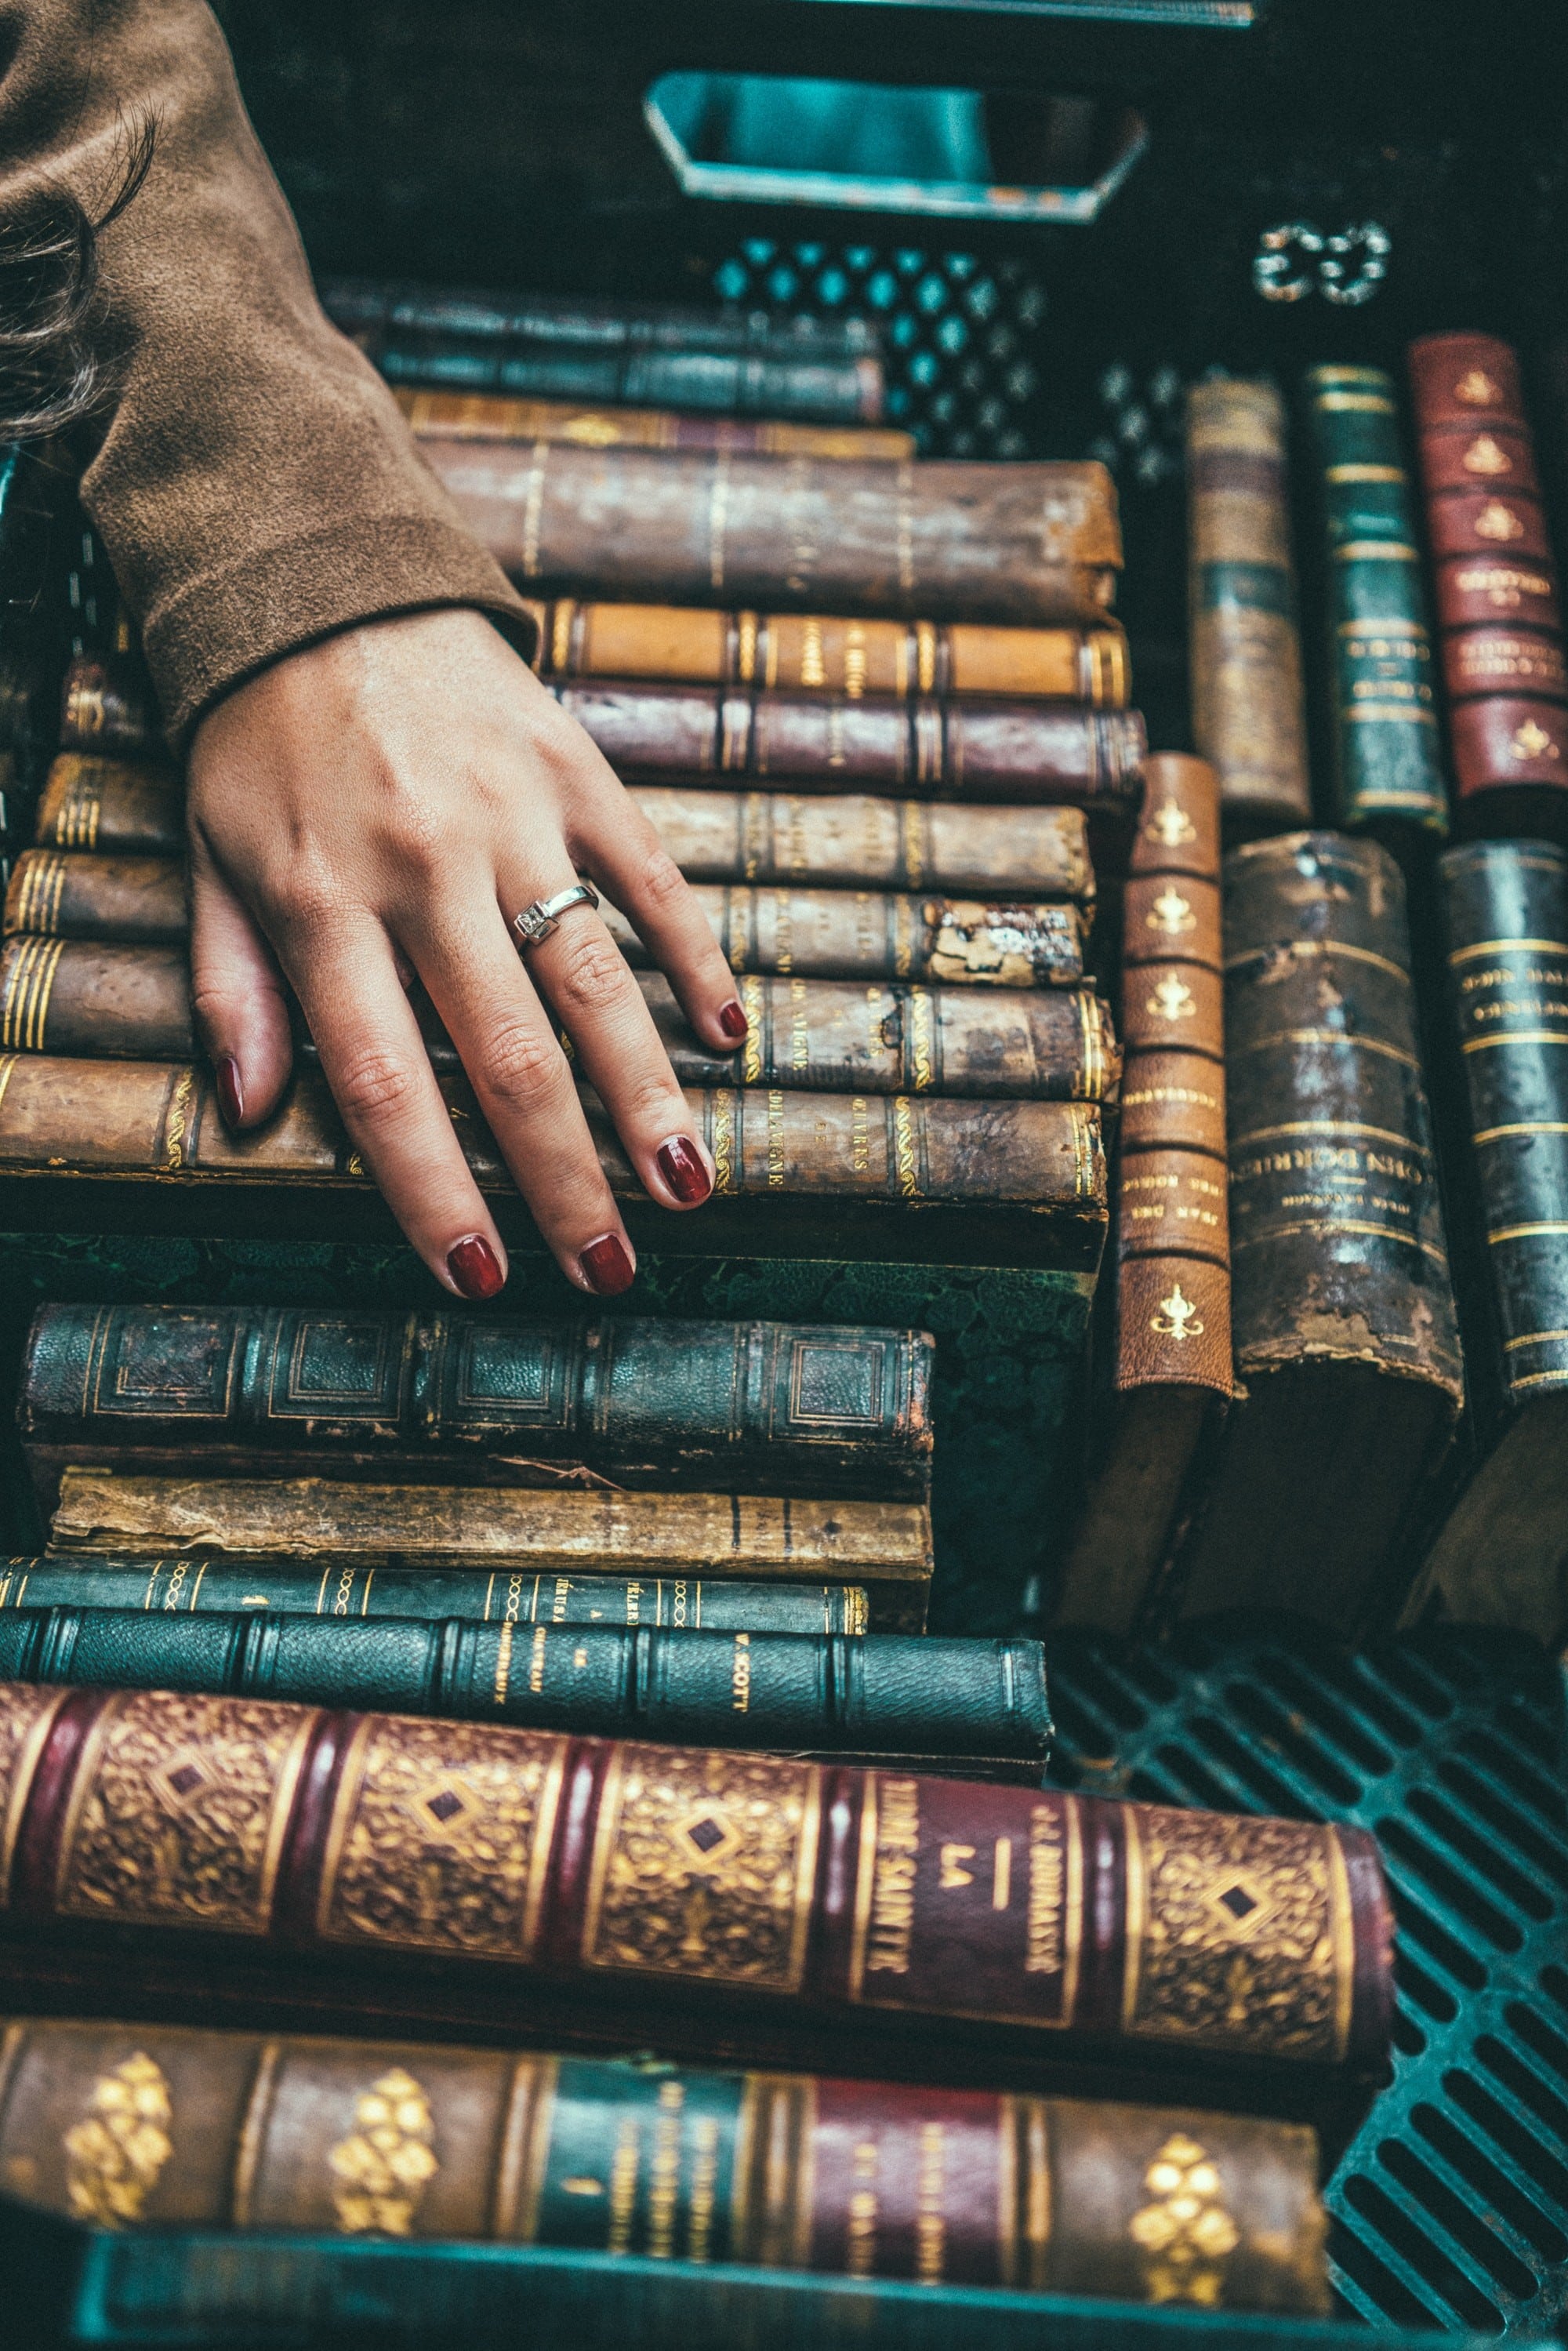 A large spread of antique leather, gold-gilded books with a woman's hand resting on them.